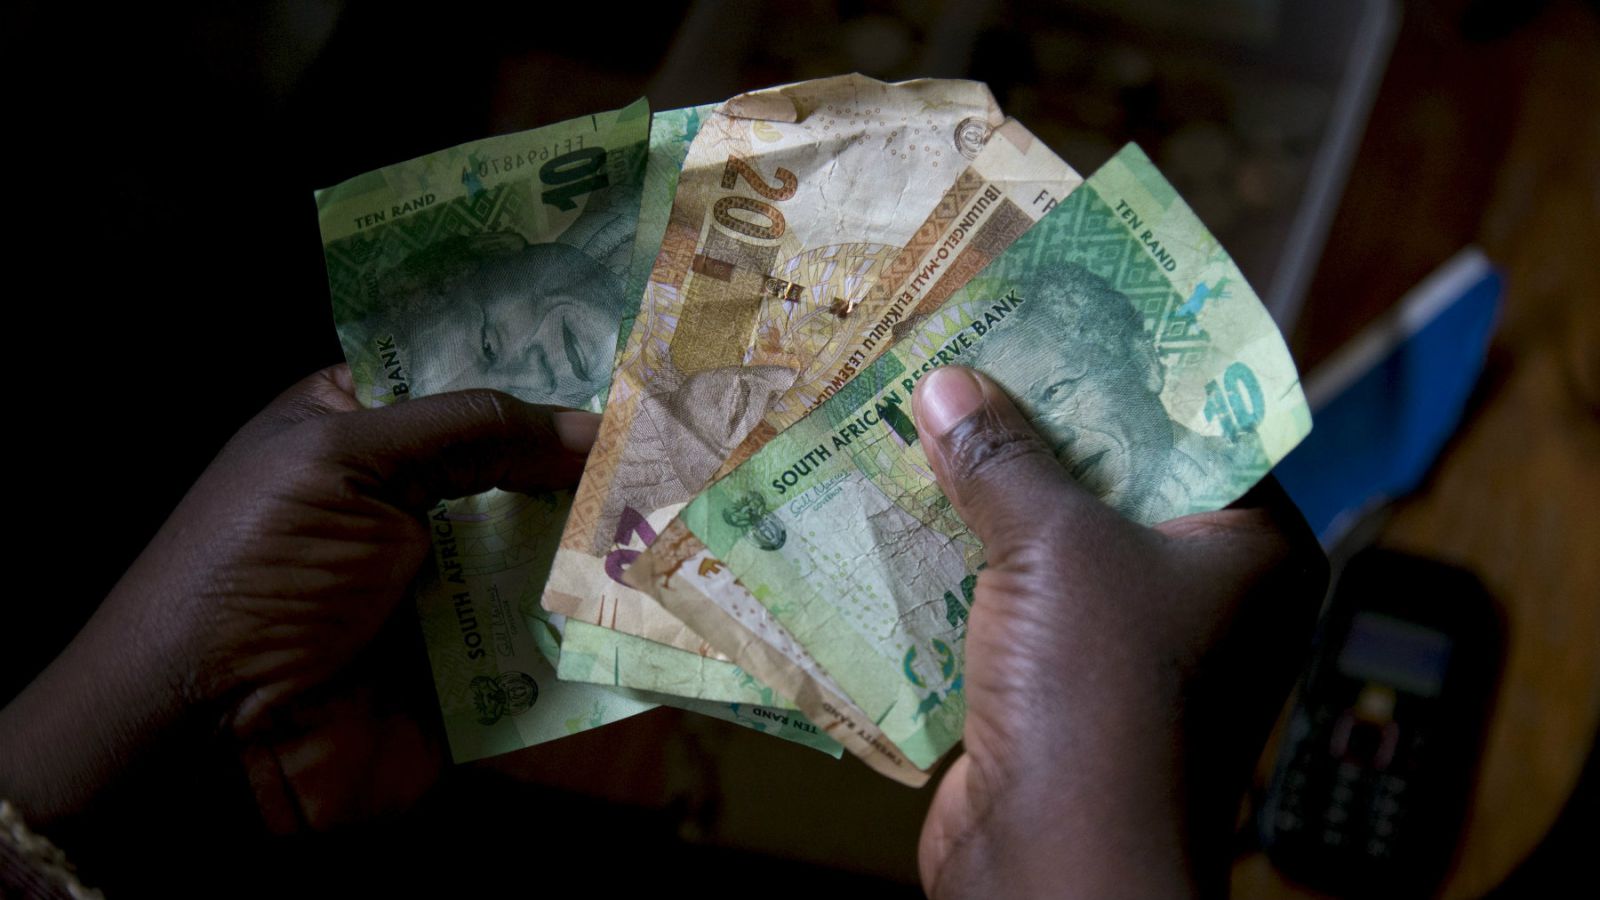 Even in the promised land of digital money, cash will stay king for a long while yet